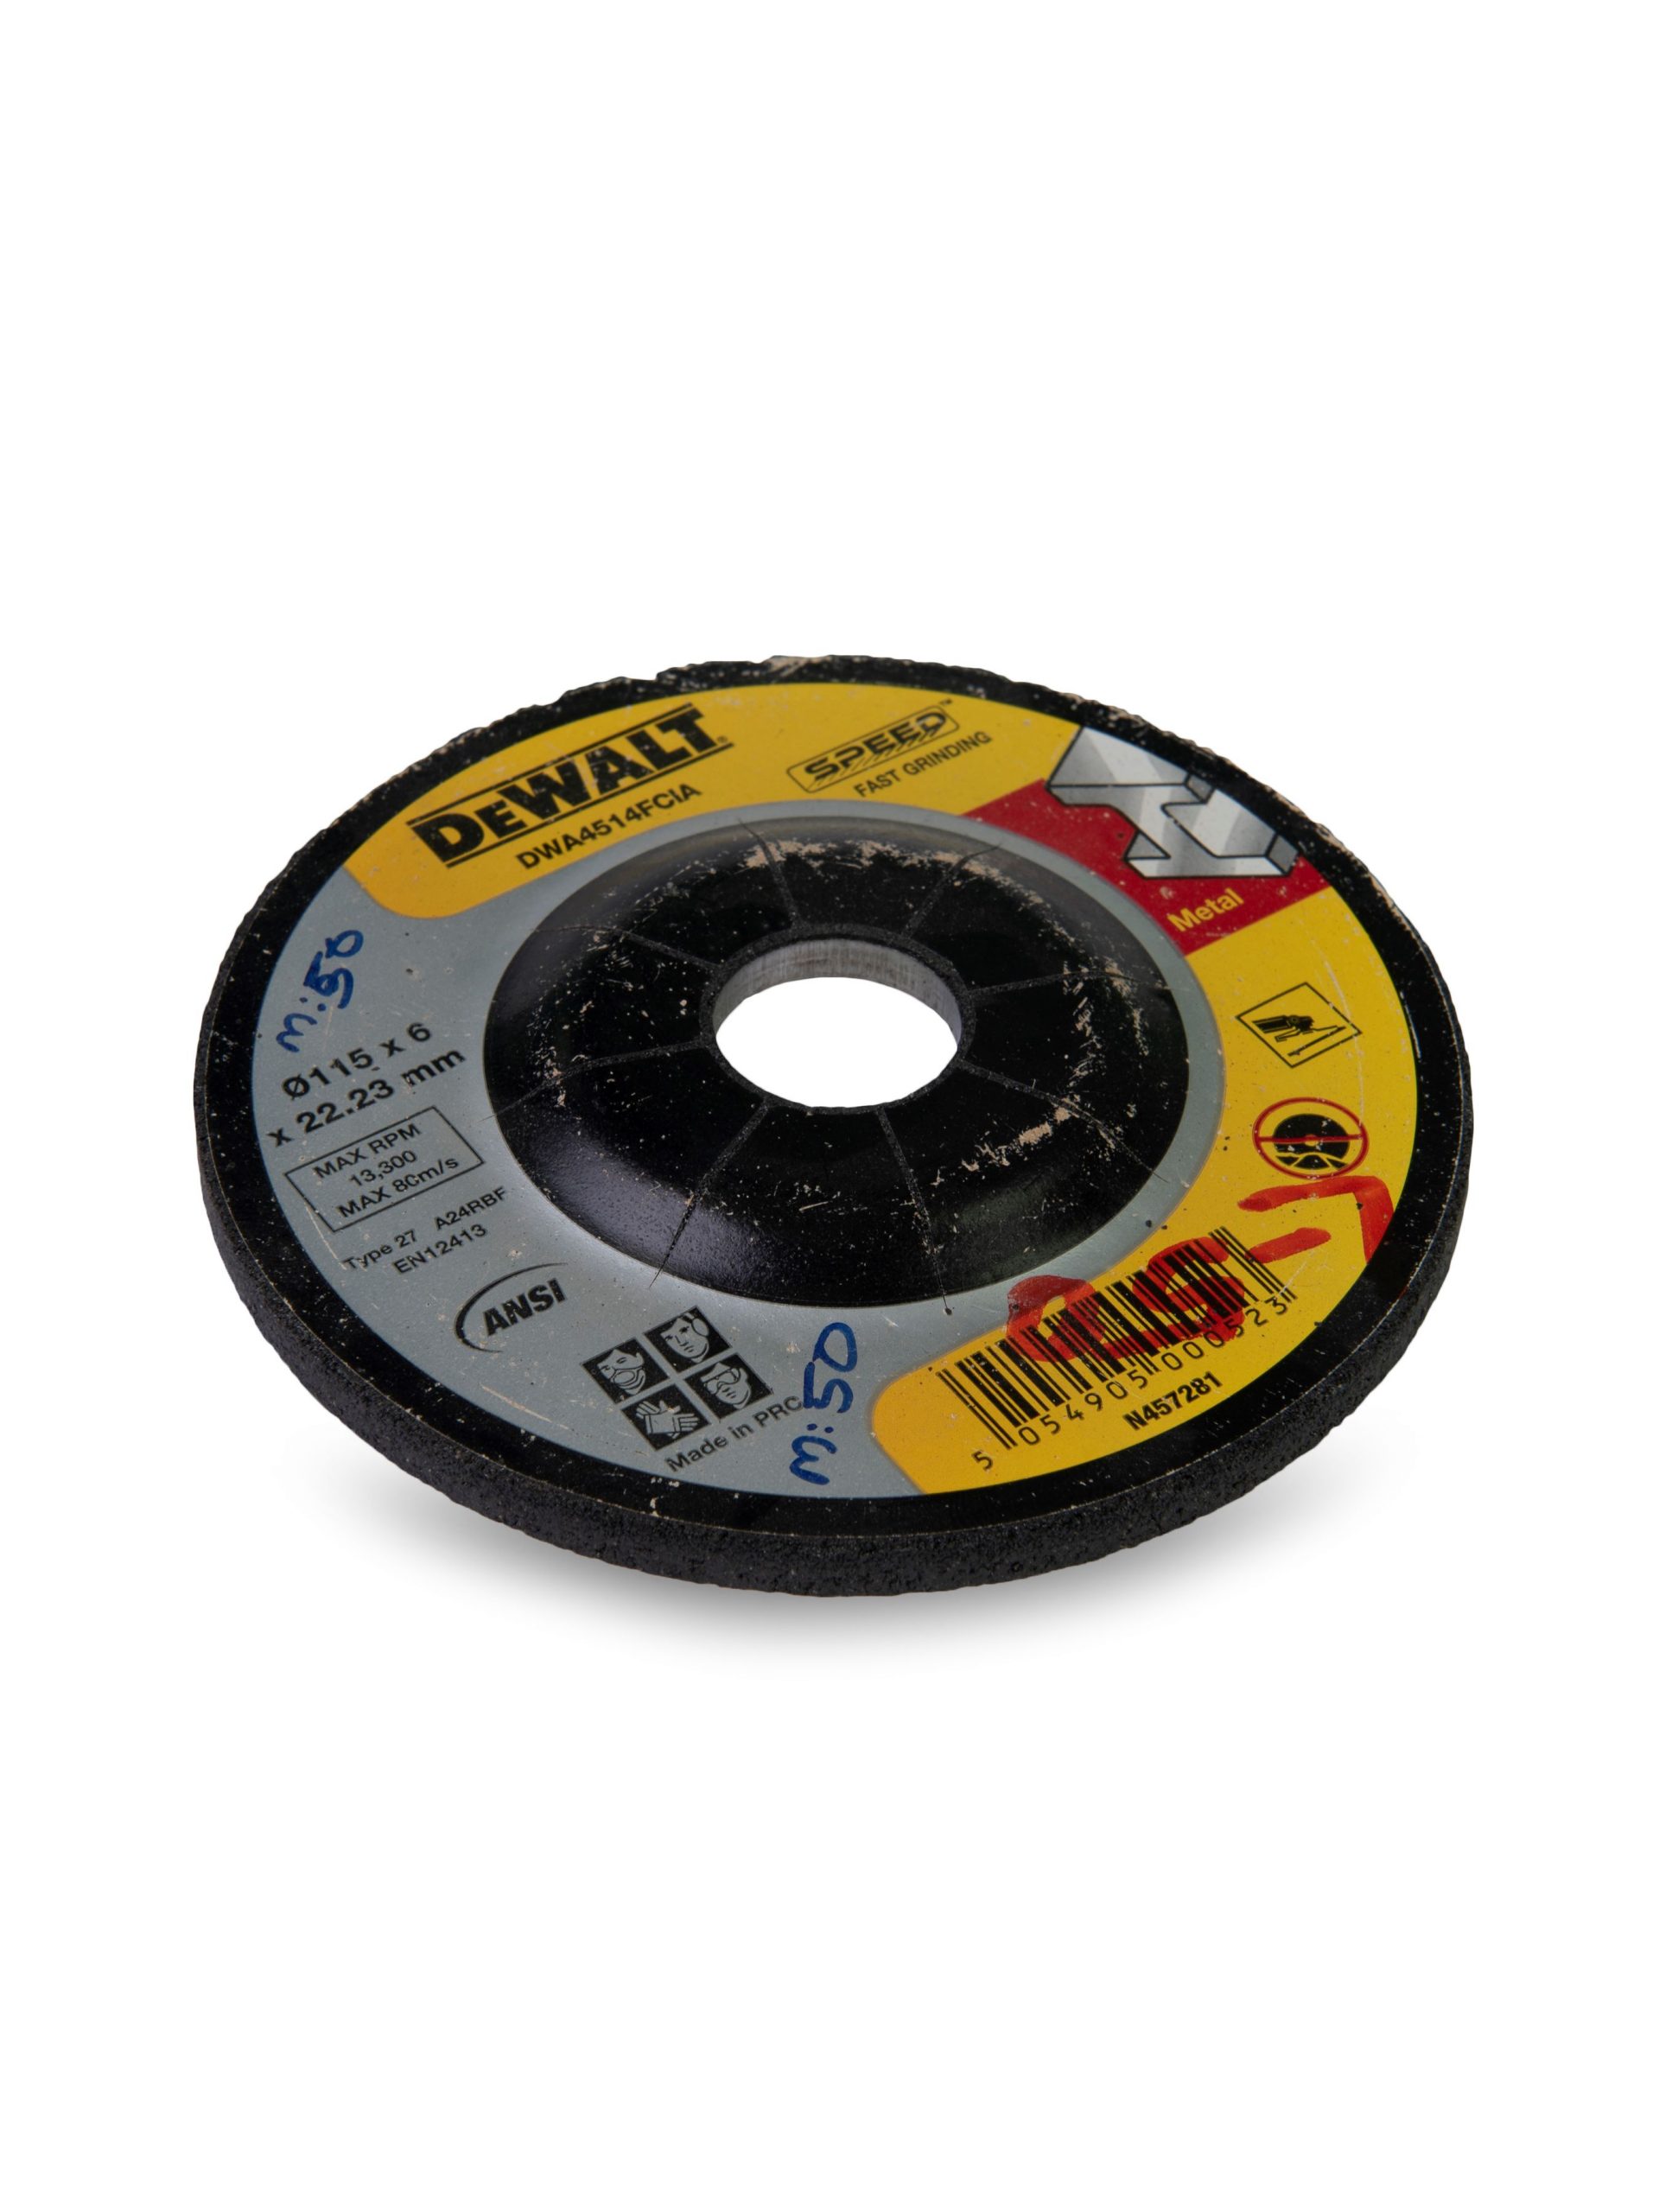 GRINDING DISK 4 1/2 INCHES X 6MM in UAE